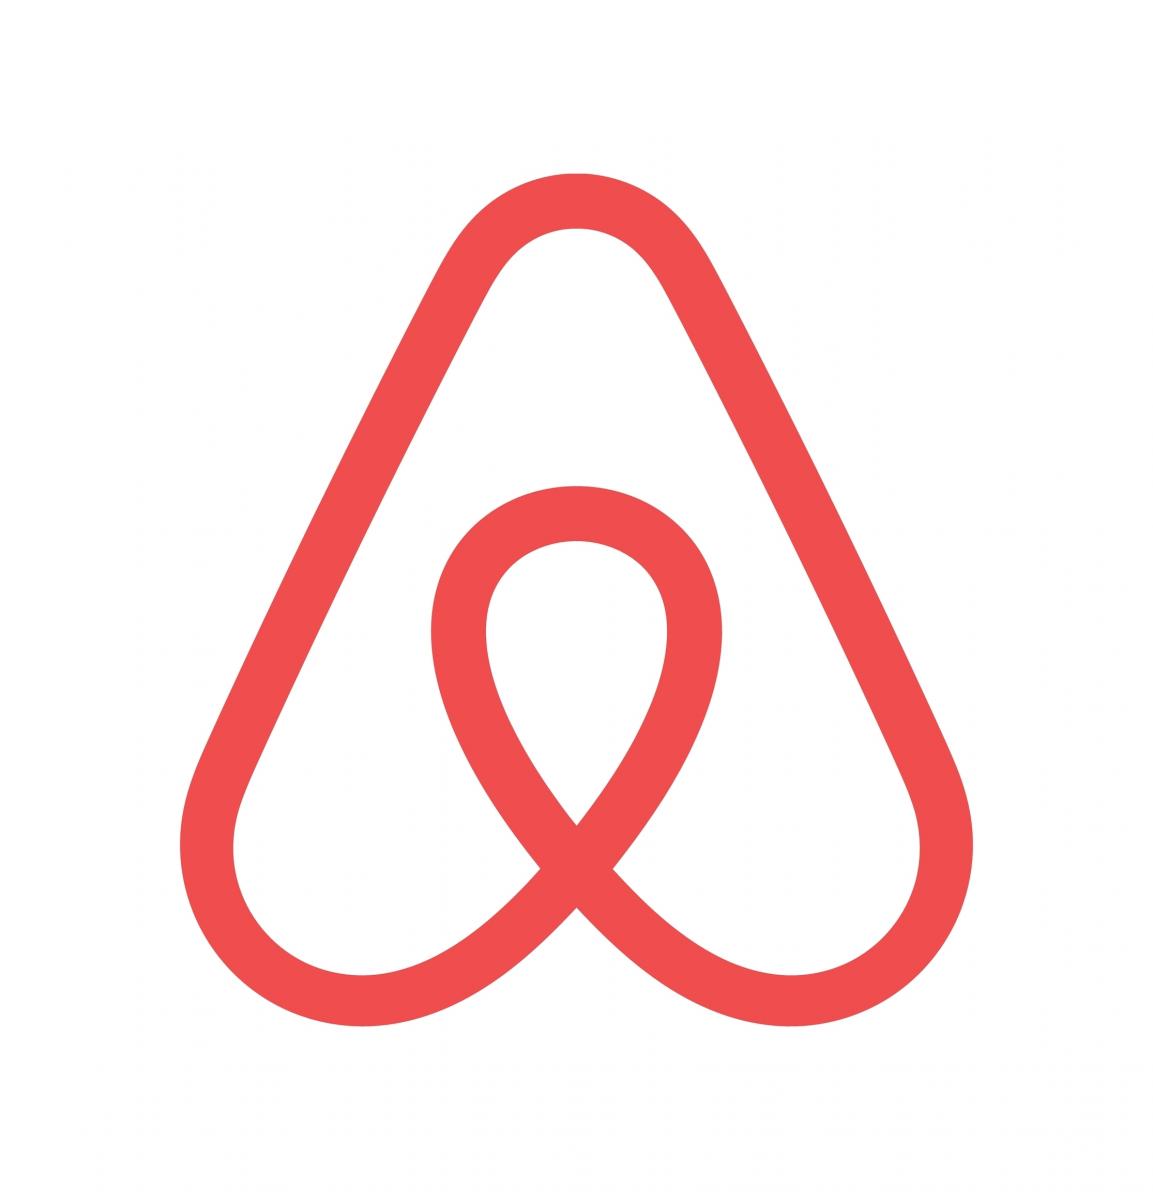 Airbnb gives its landlords tax tips to satisfy HMRC